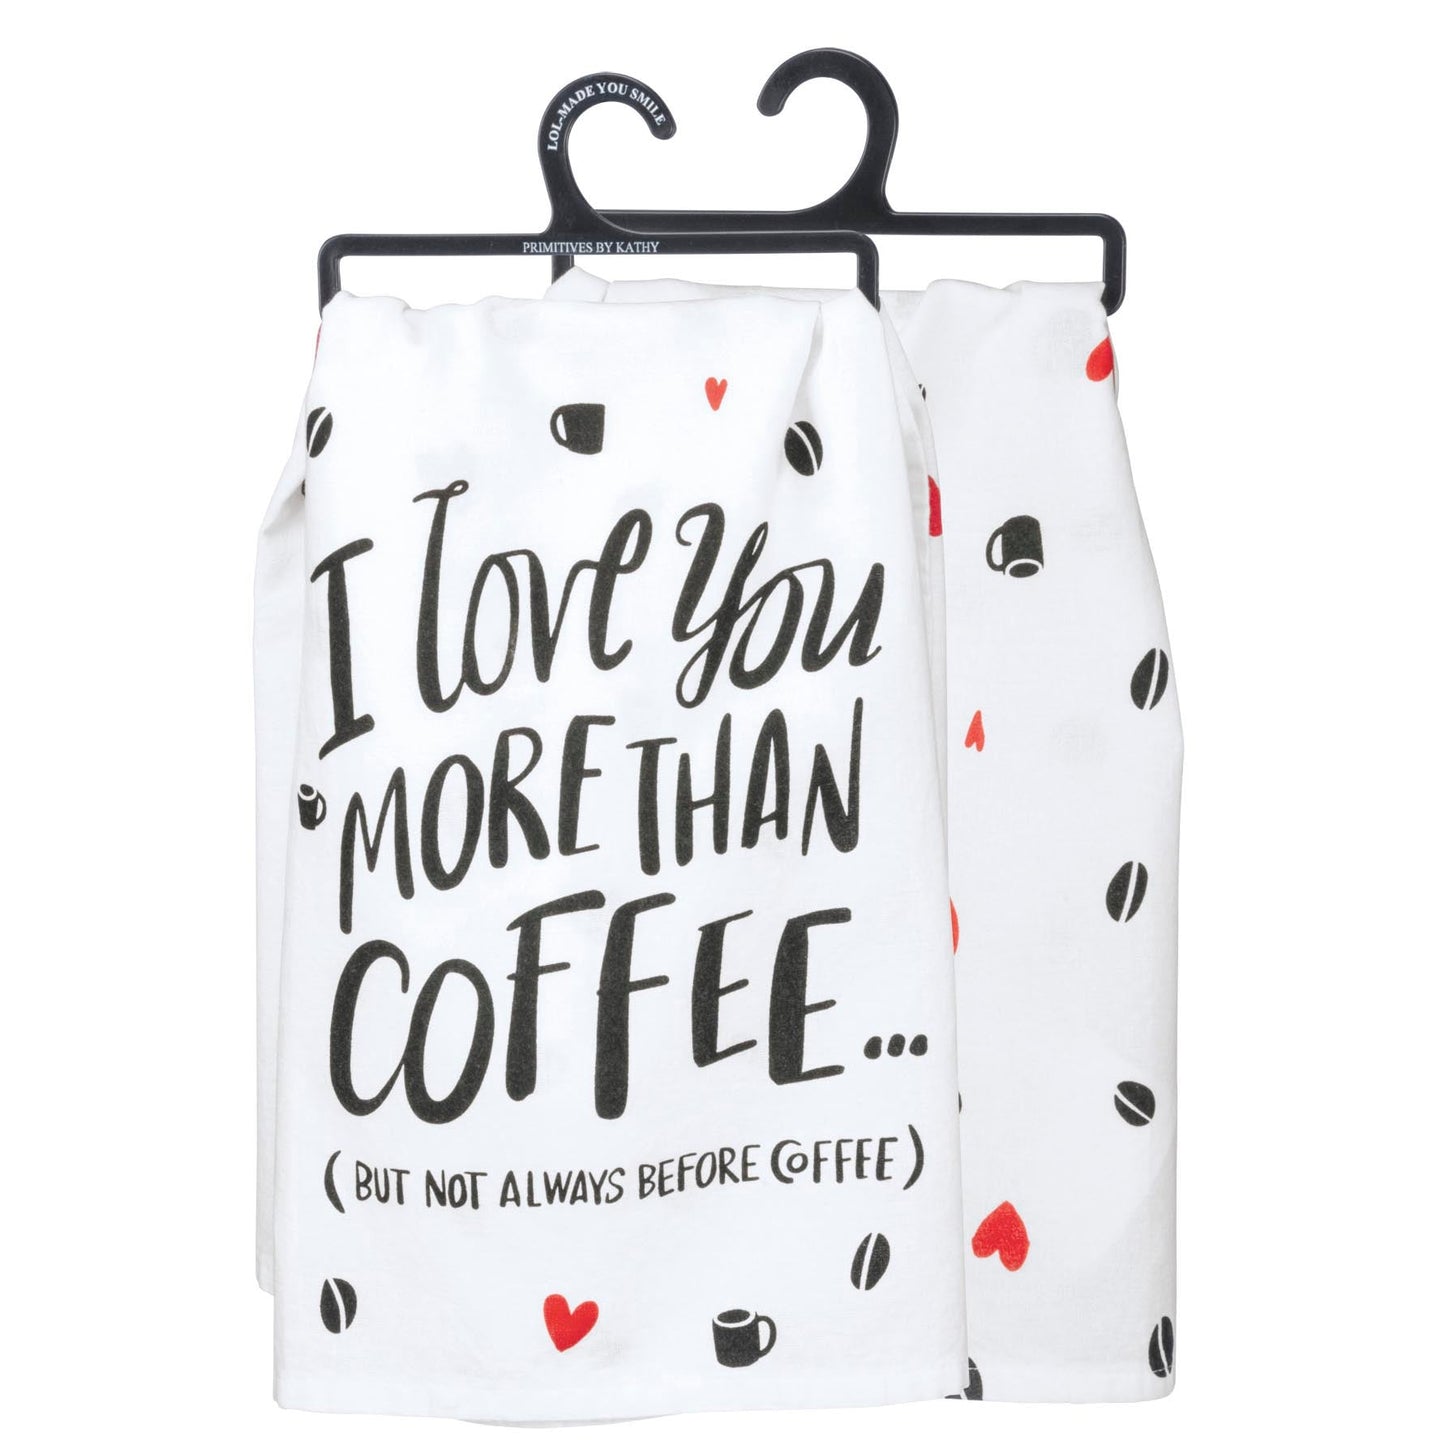 I Love You More Than Coffee Funny Snarky Dish Cloth Towel / Novelty Silly Tea Towels / Cute Hilarious Kitchen Hand Towel